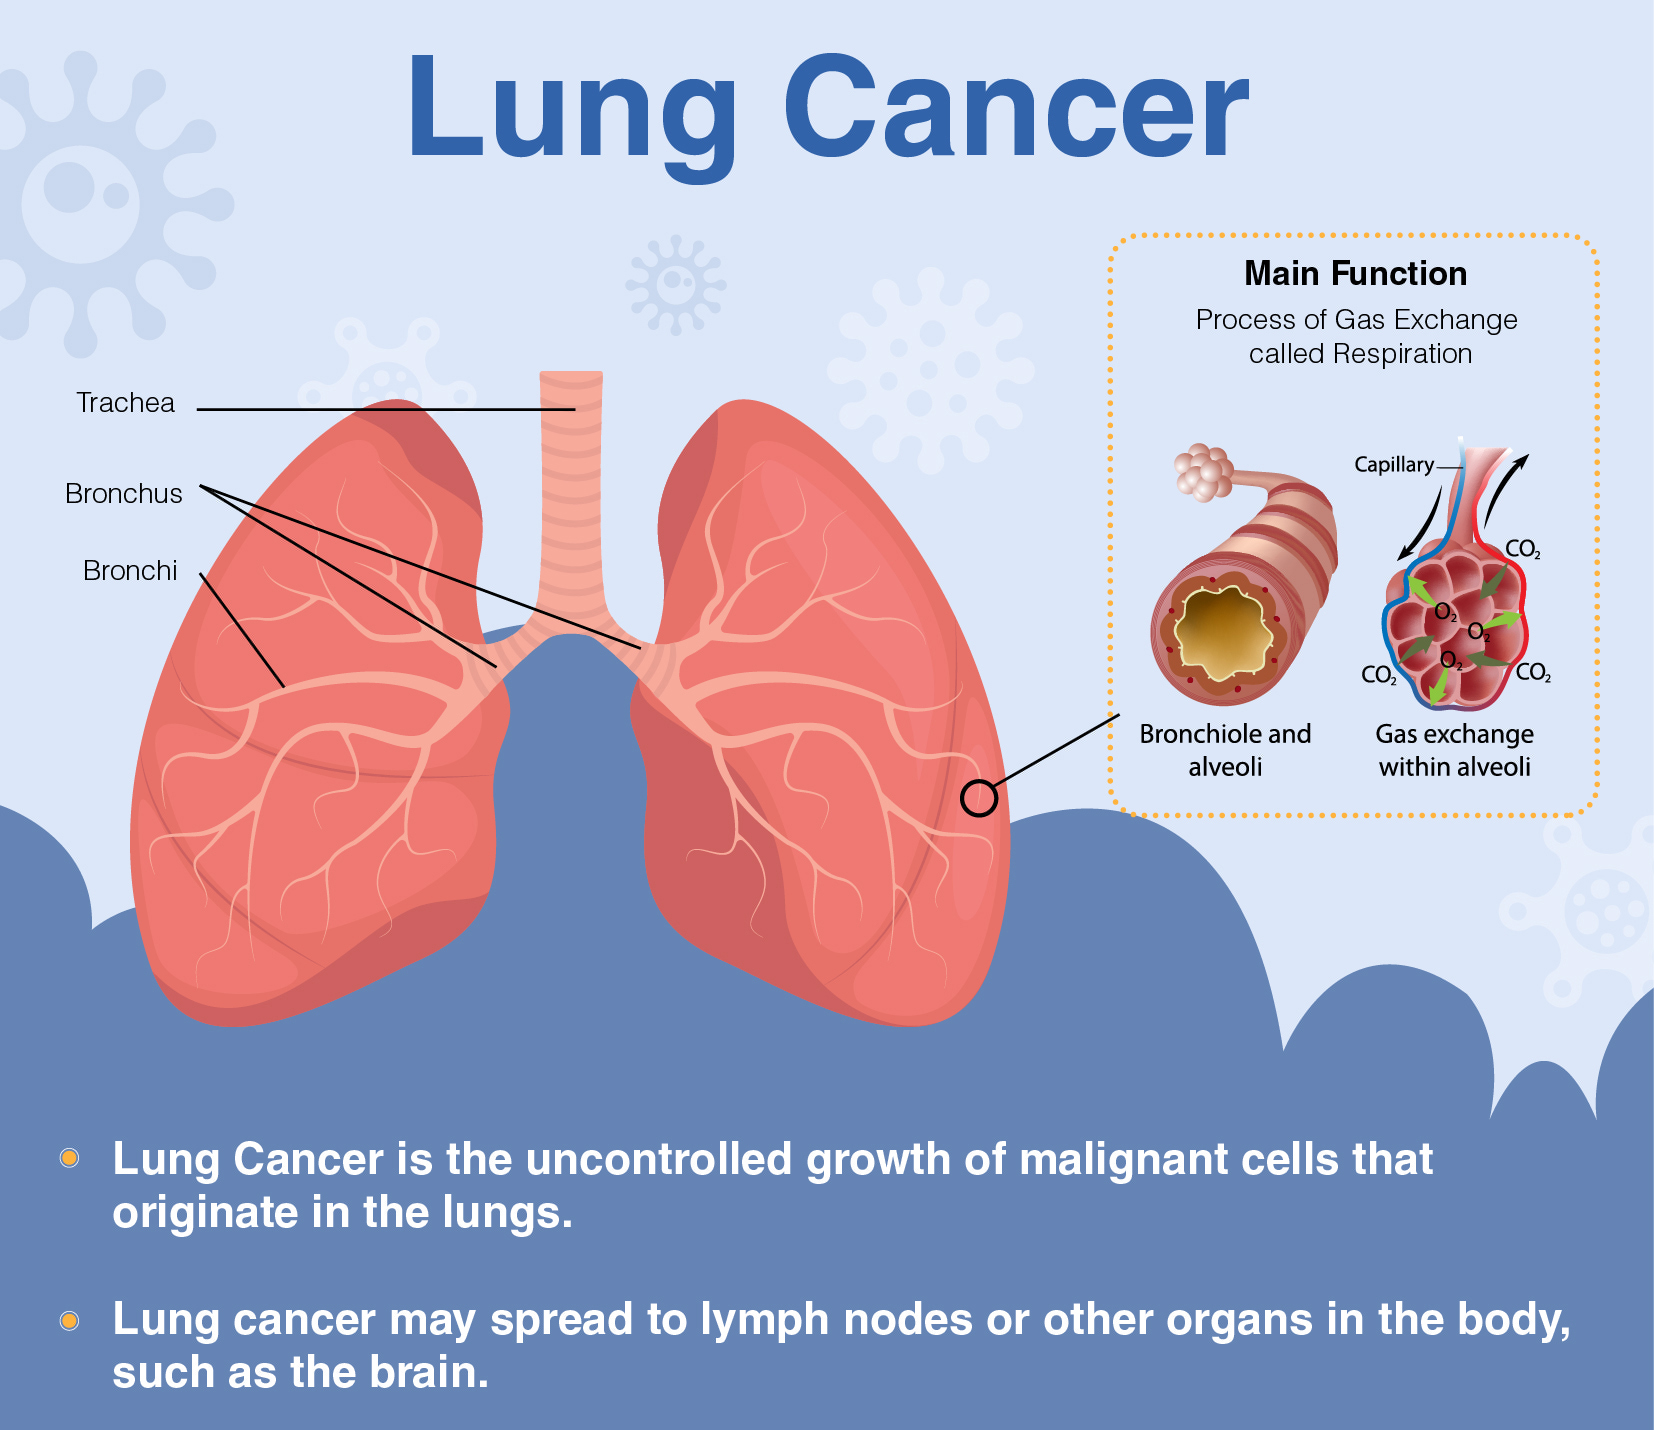 Overview of Lung Cancer: Signs, Symptoms, Diagnosis & Treatment